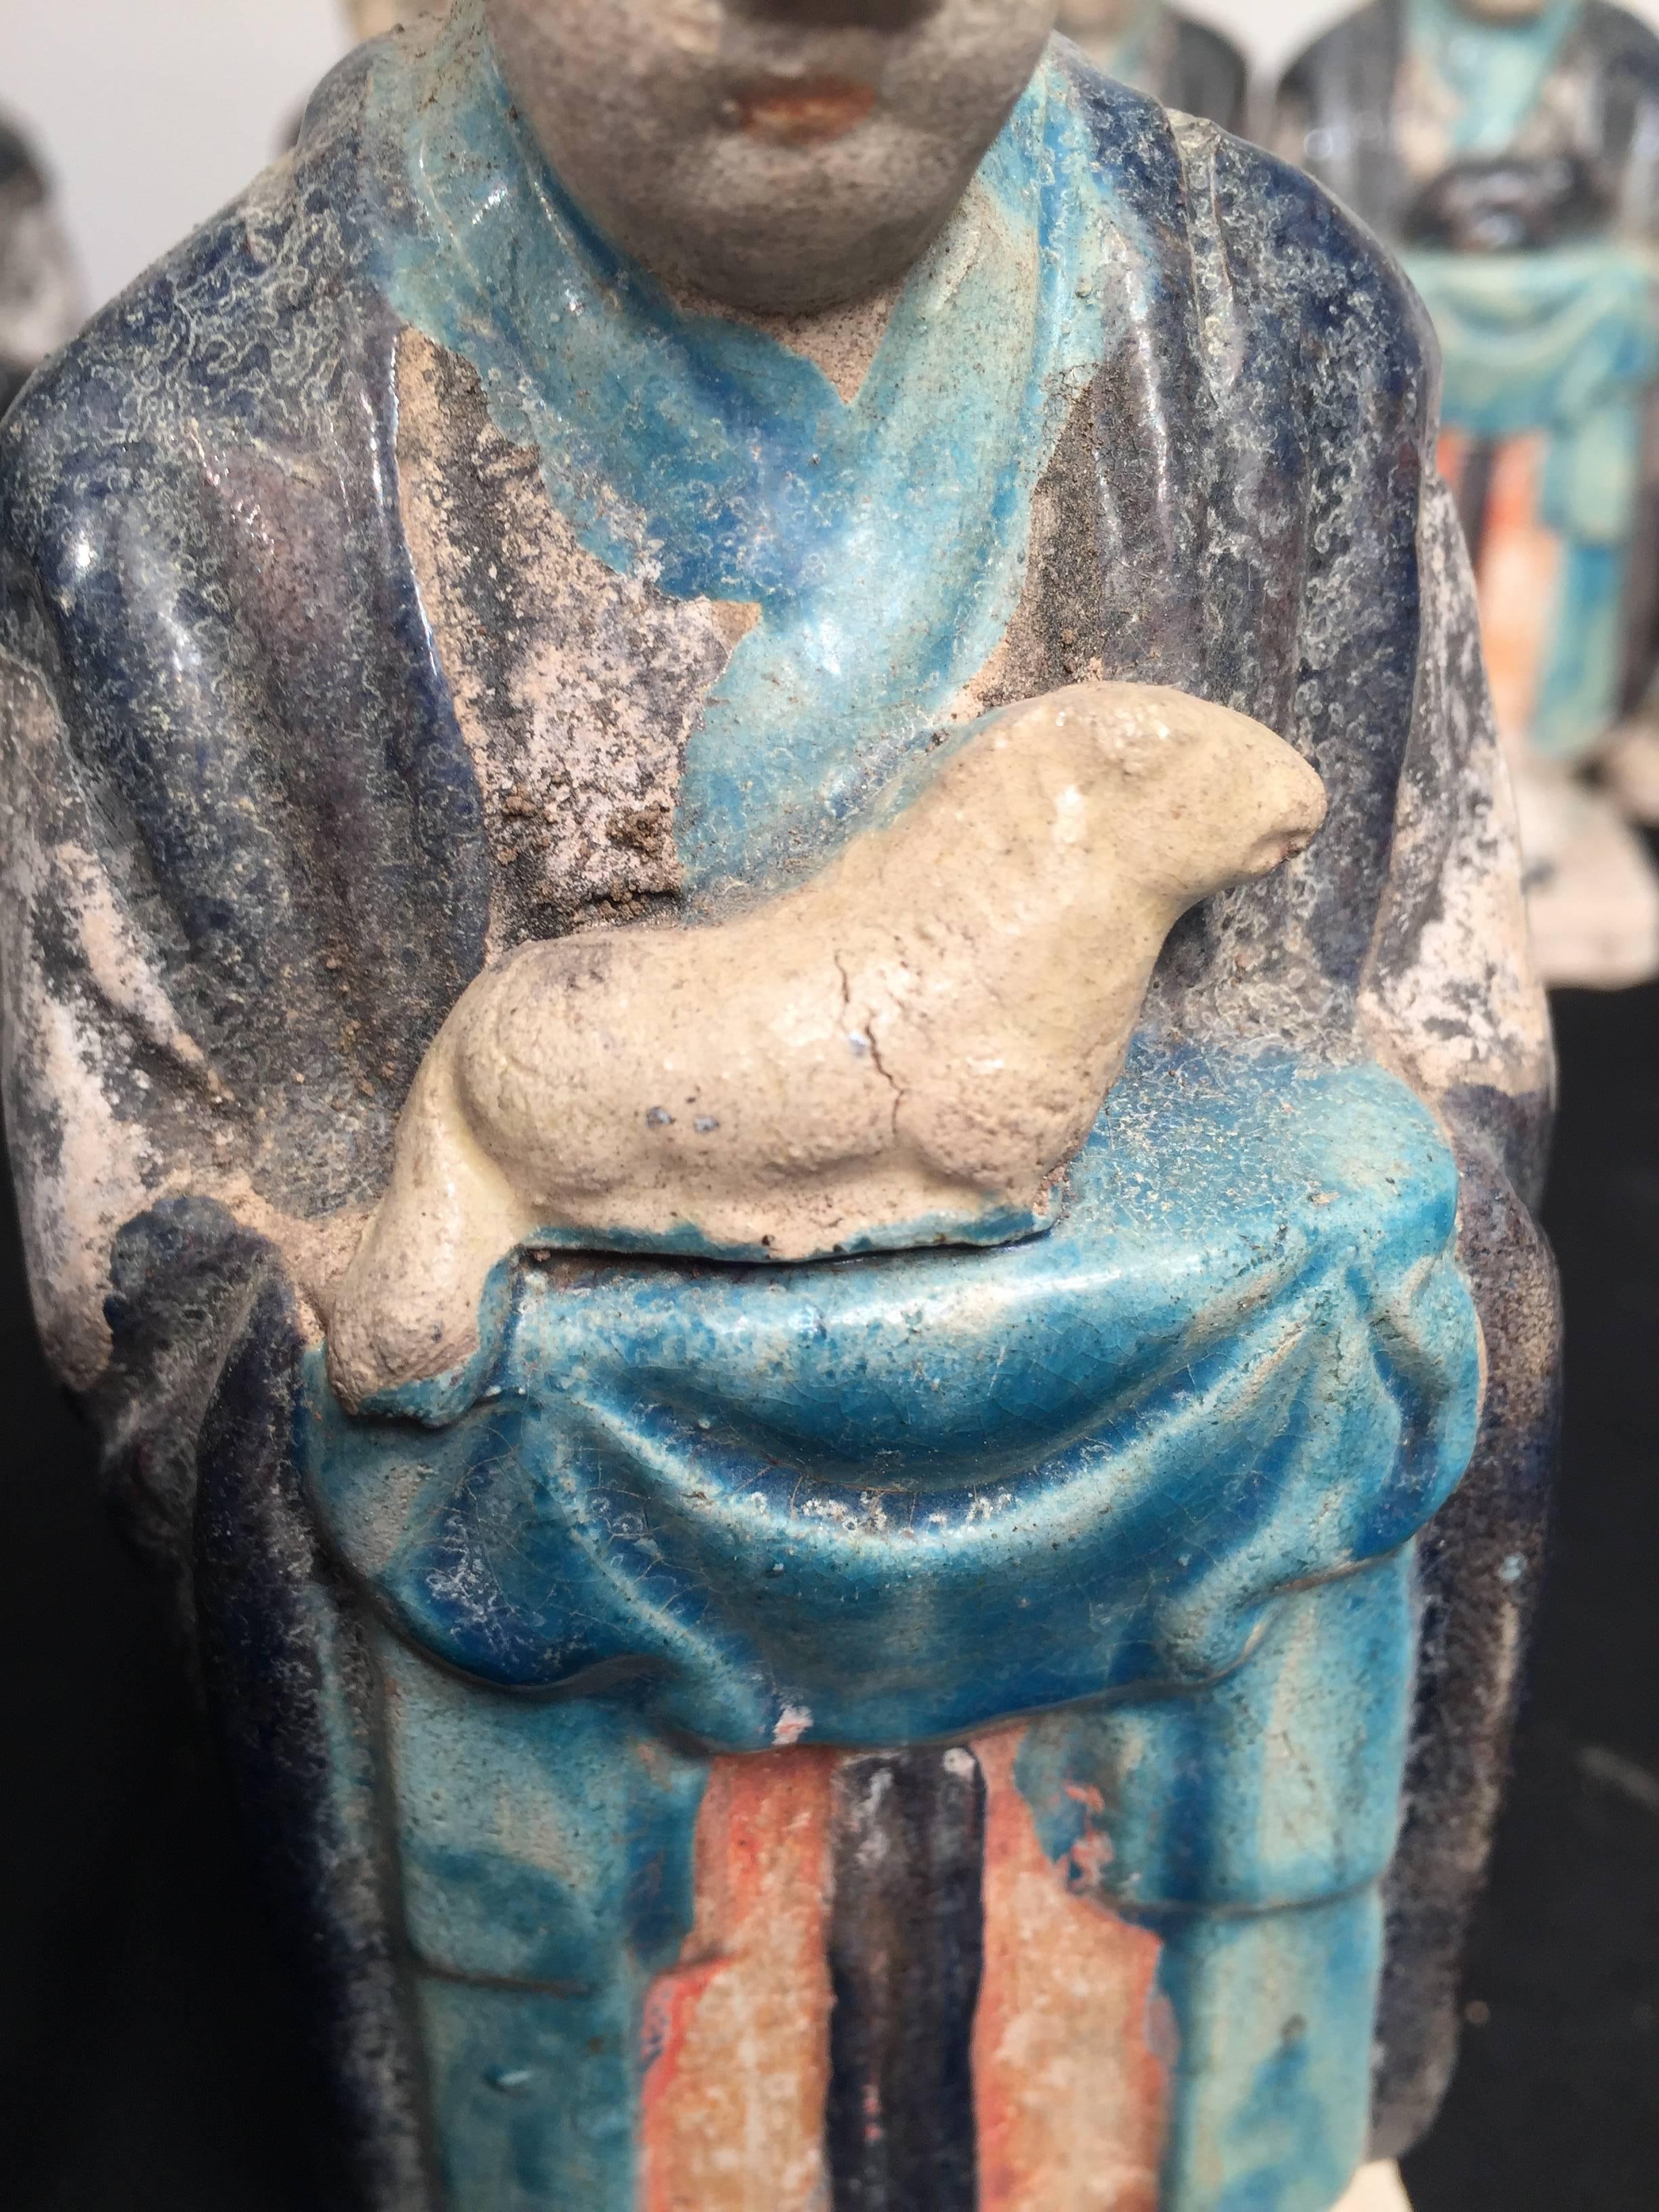 Glazed Important Ancient Chinese Zodiac Figure Holding a Horse, Ming Dynasty, 1368-1644